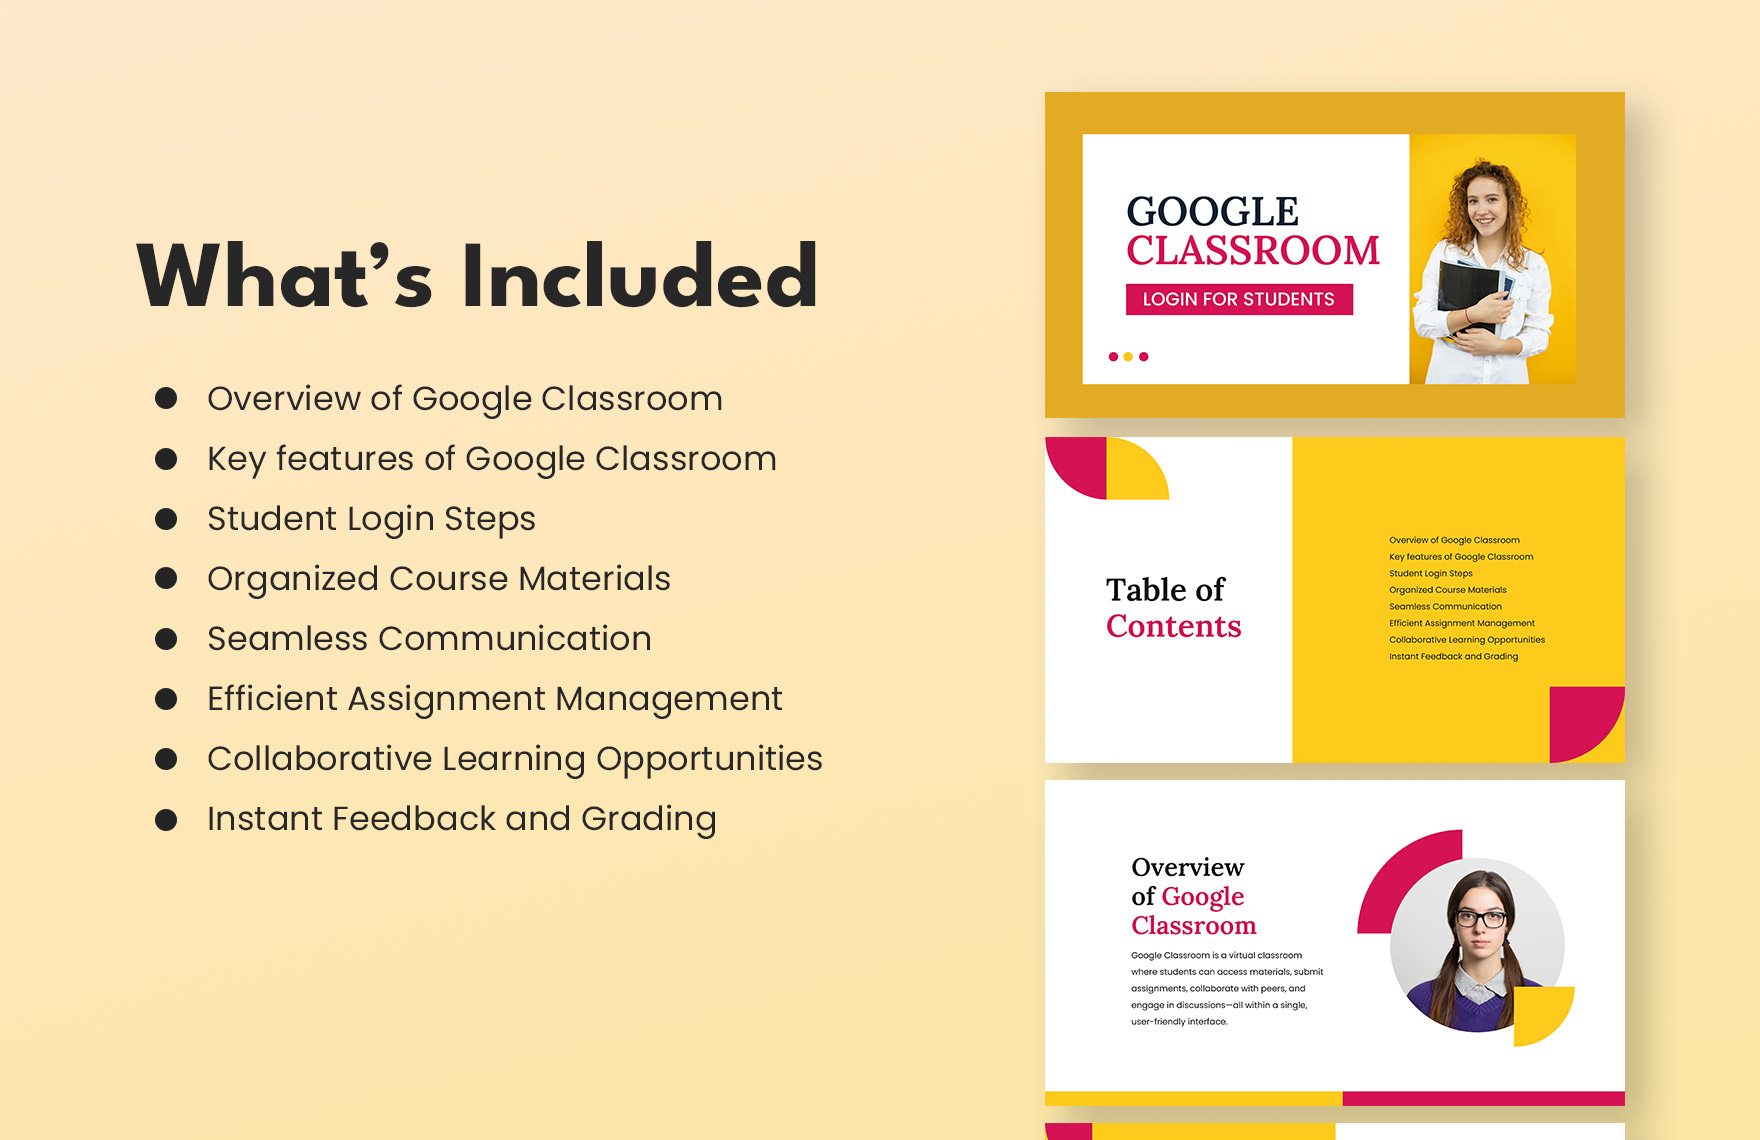 Google Classroom Login for Students